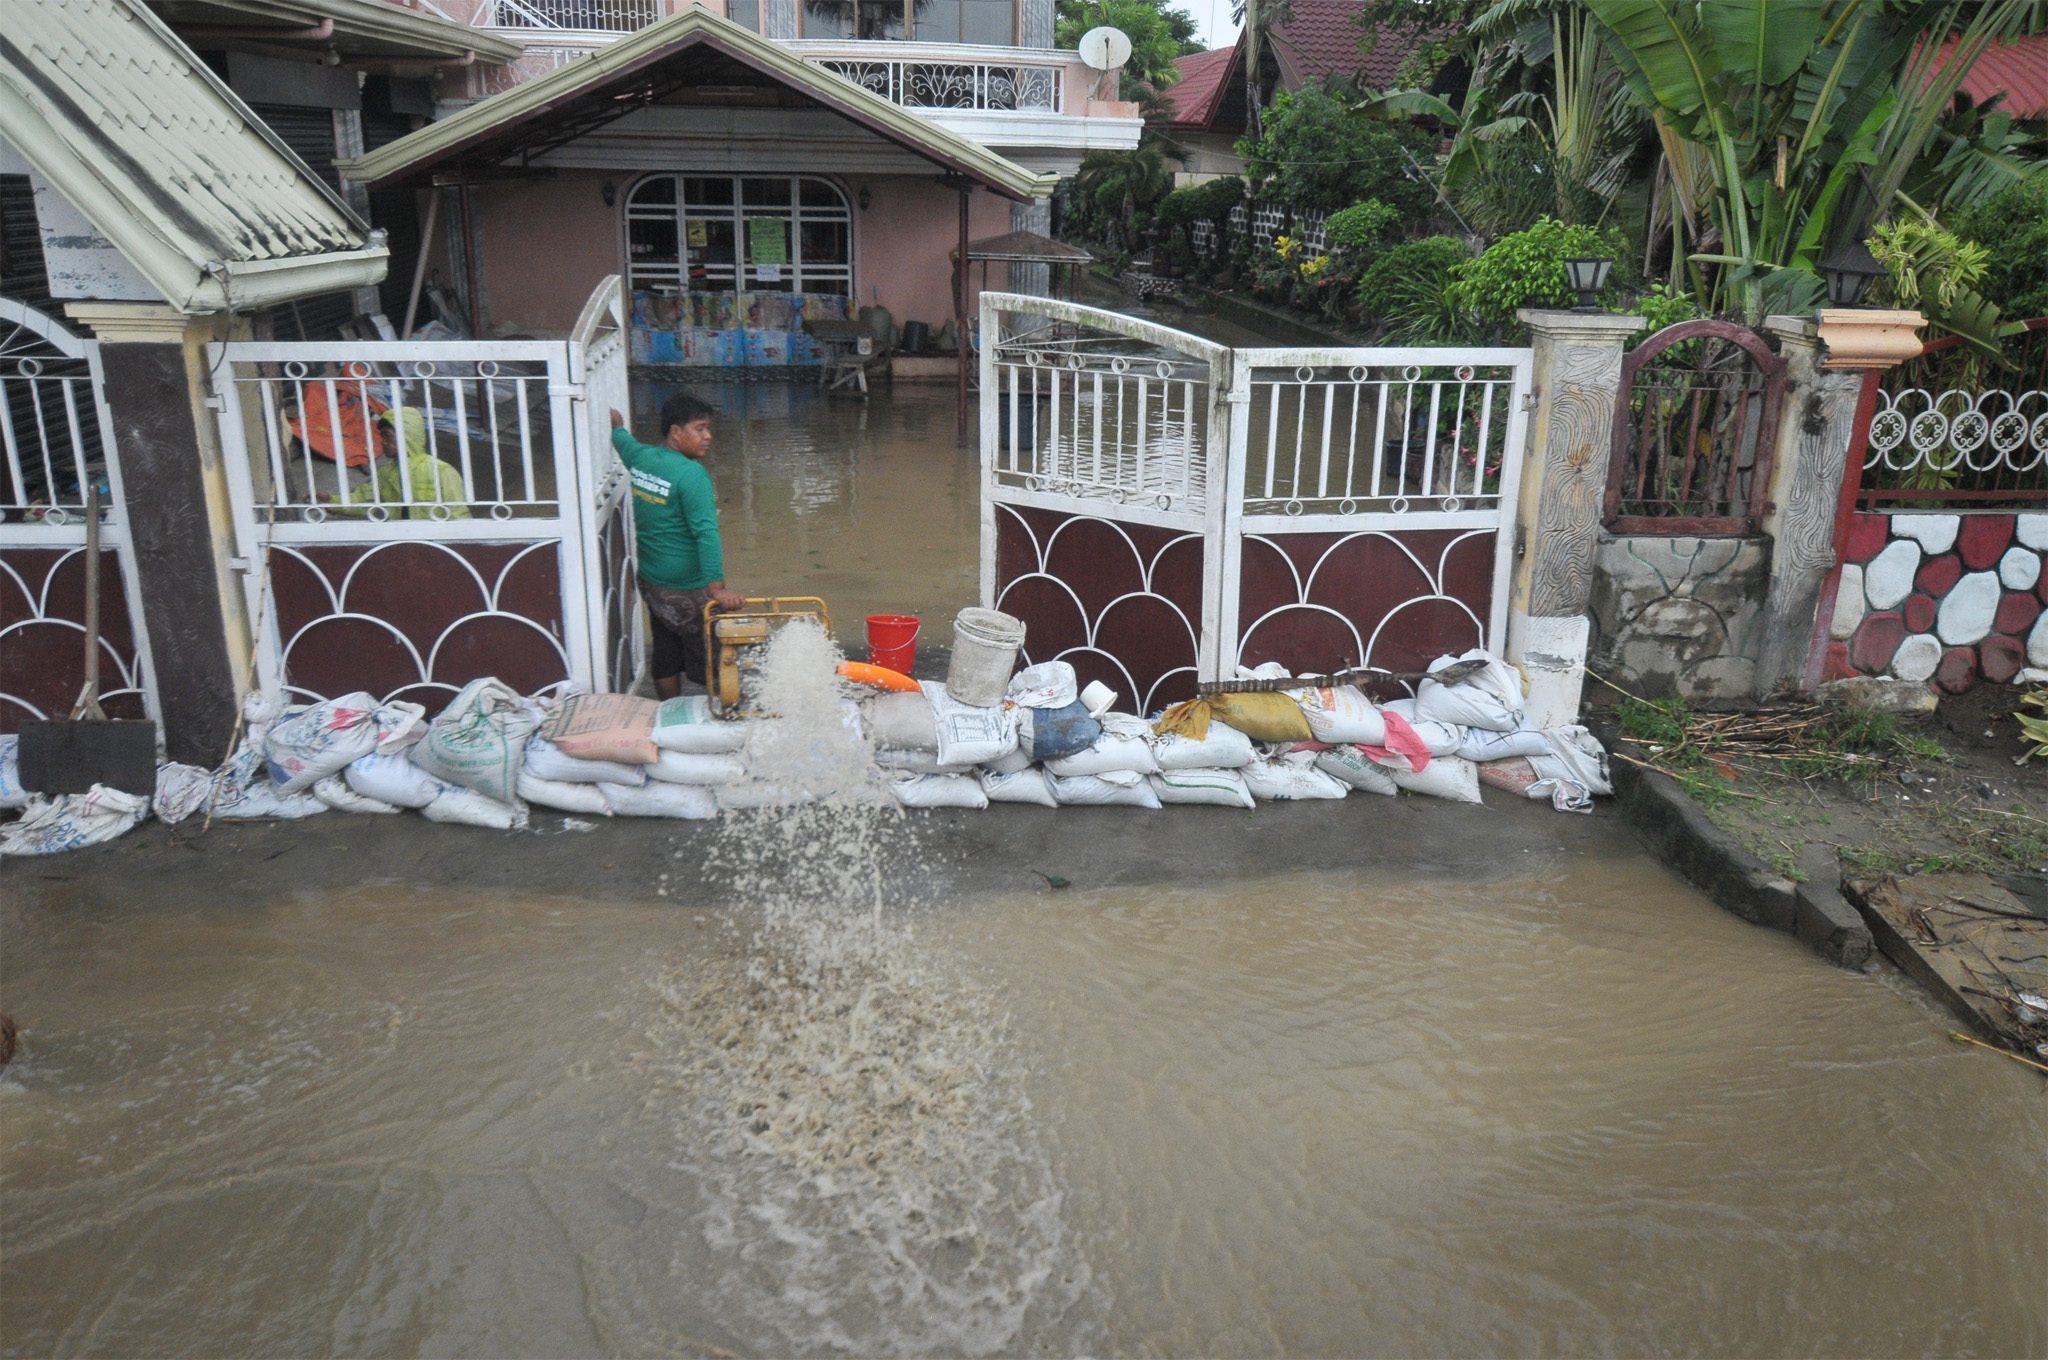 More deaths, injuries in Central Luzon due to Typhoon Lando